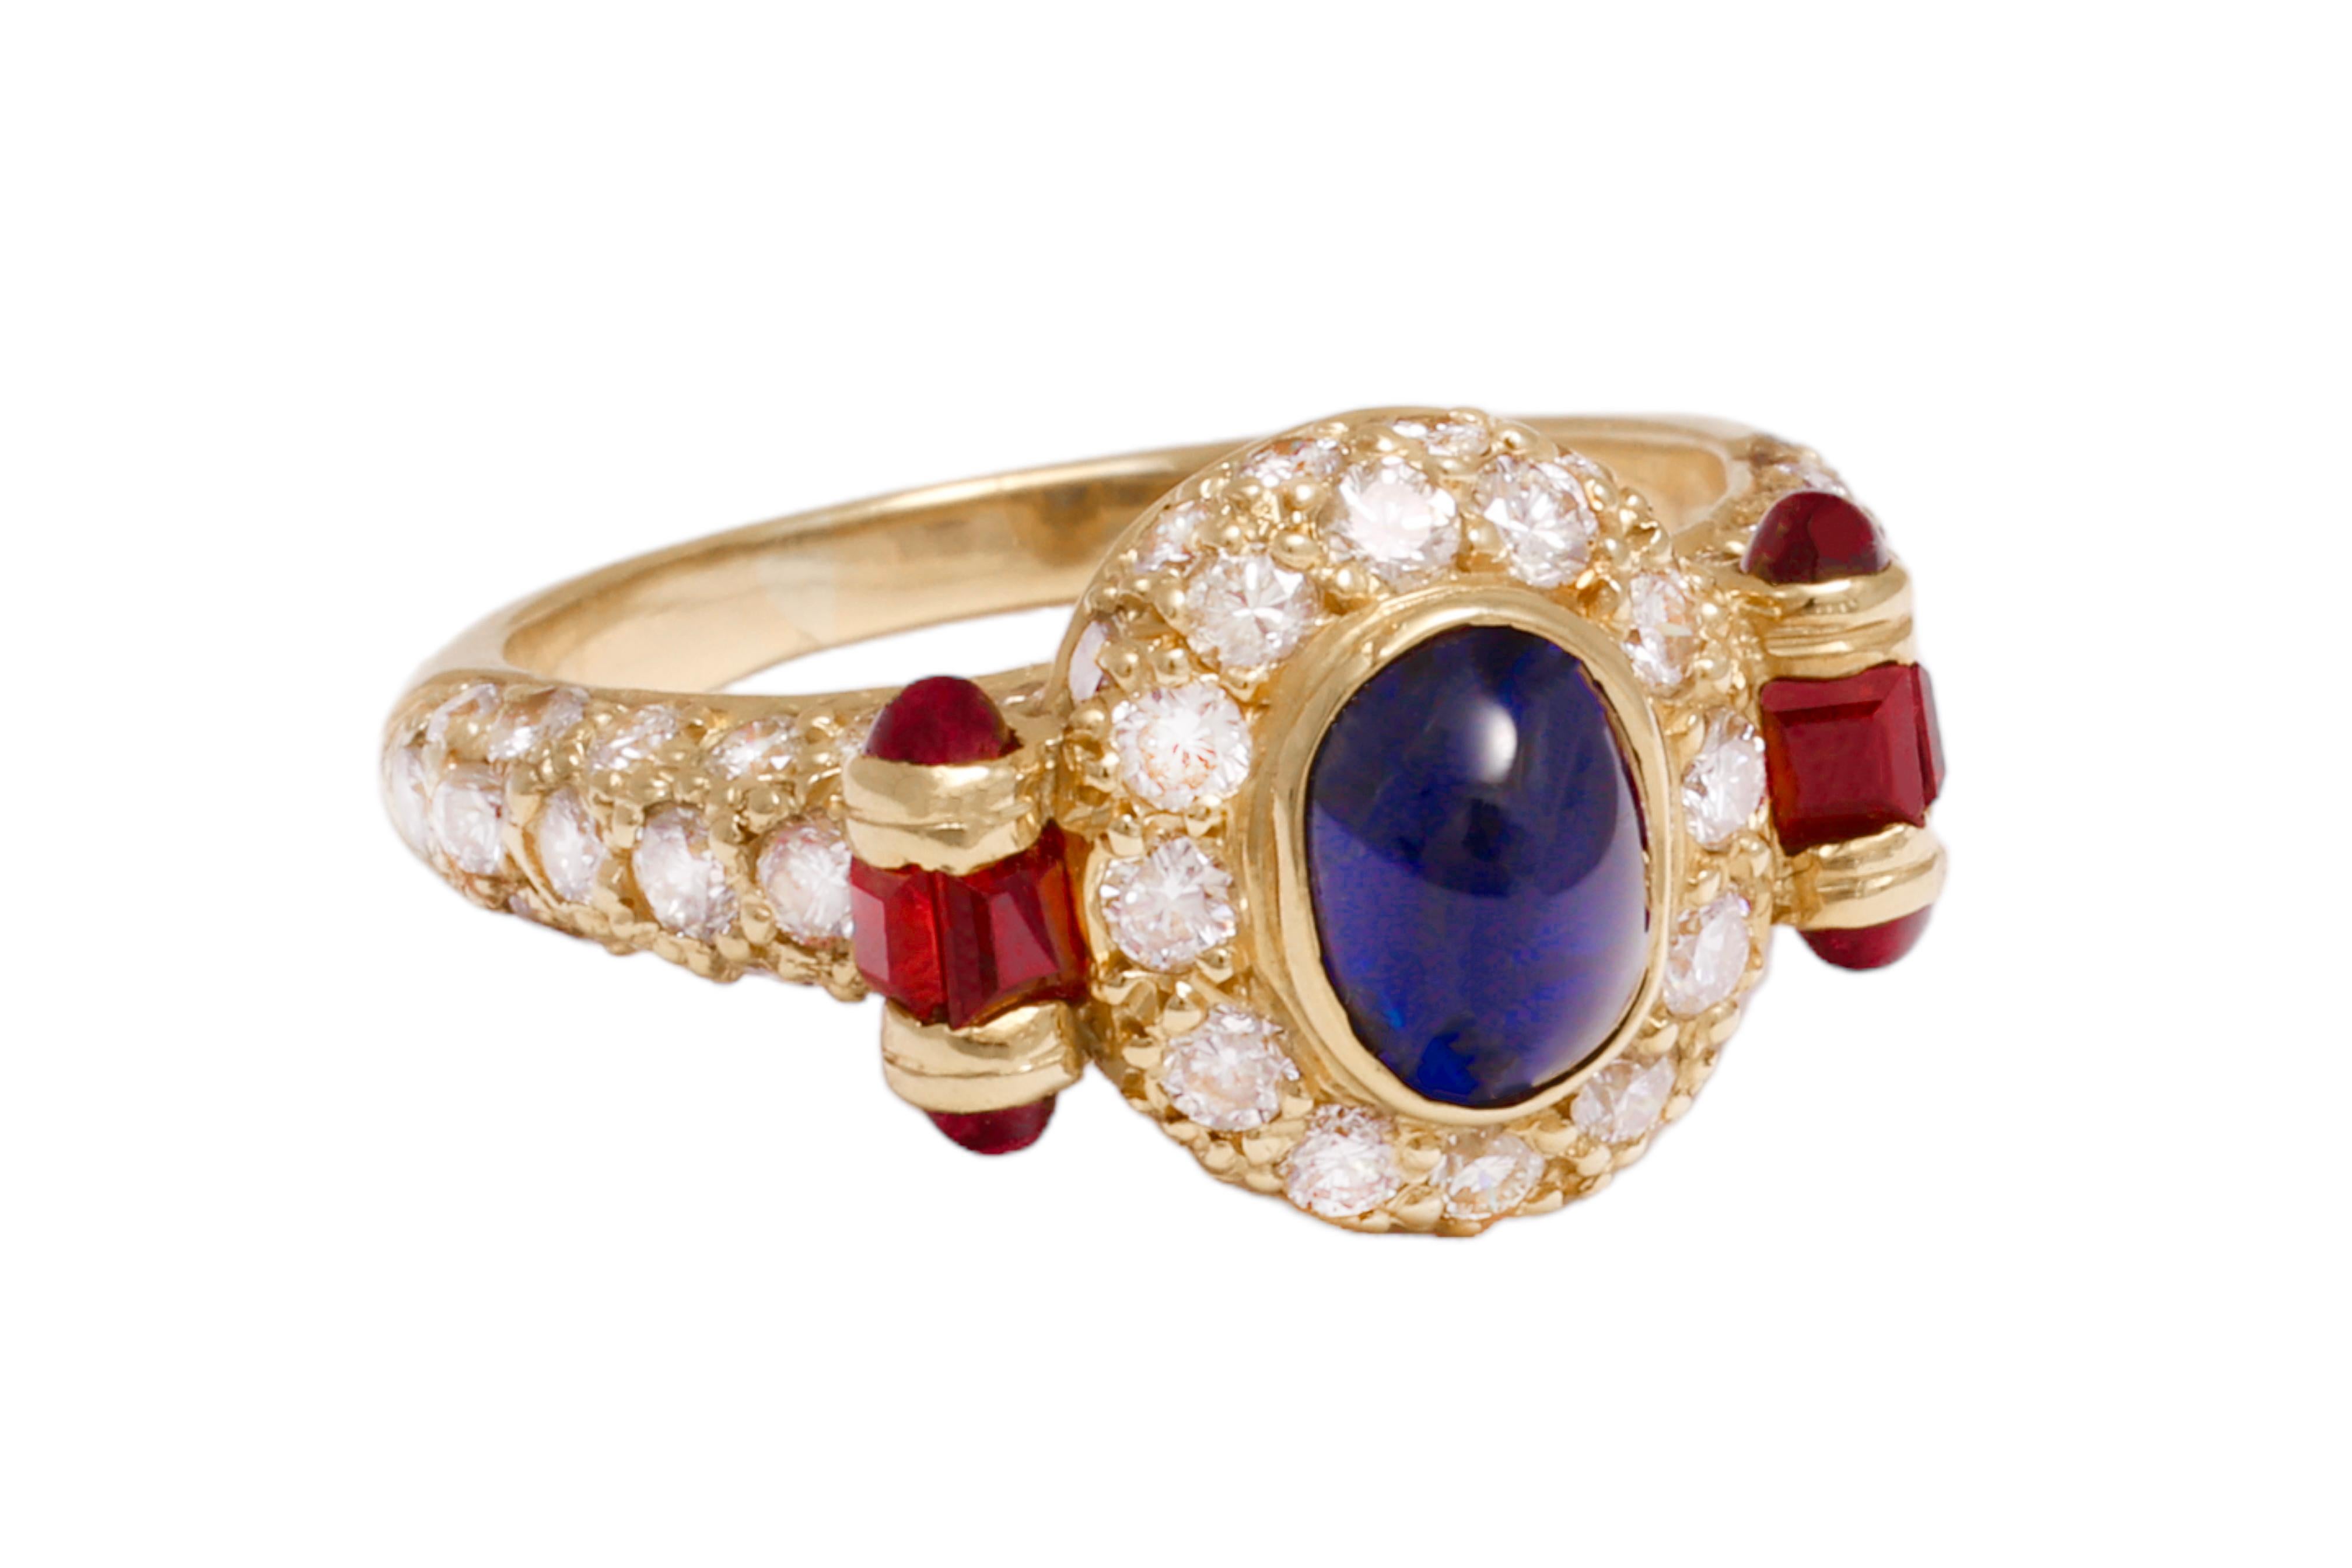 Magnificant 18 kt. Gold Ring With Cabochon Sapphire and Ruby  and Diamond

Diamonds: Brilliant cut diamonds together 1.16 ct.

Sapphire: Cabochon sapphire 1.20 ct.

Ruby: 4 mini ruby cabochon, 4 mini square cut ruby

Material: 18 kt yellow